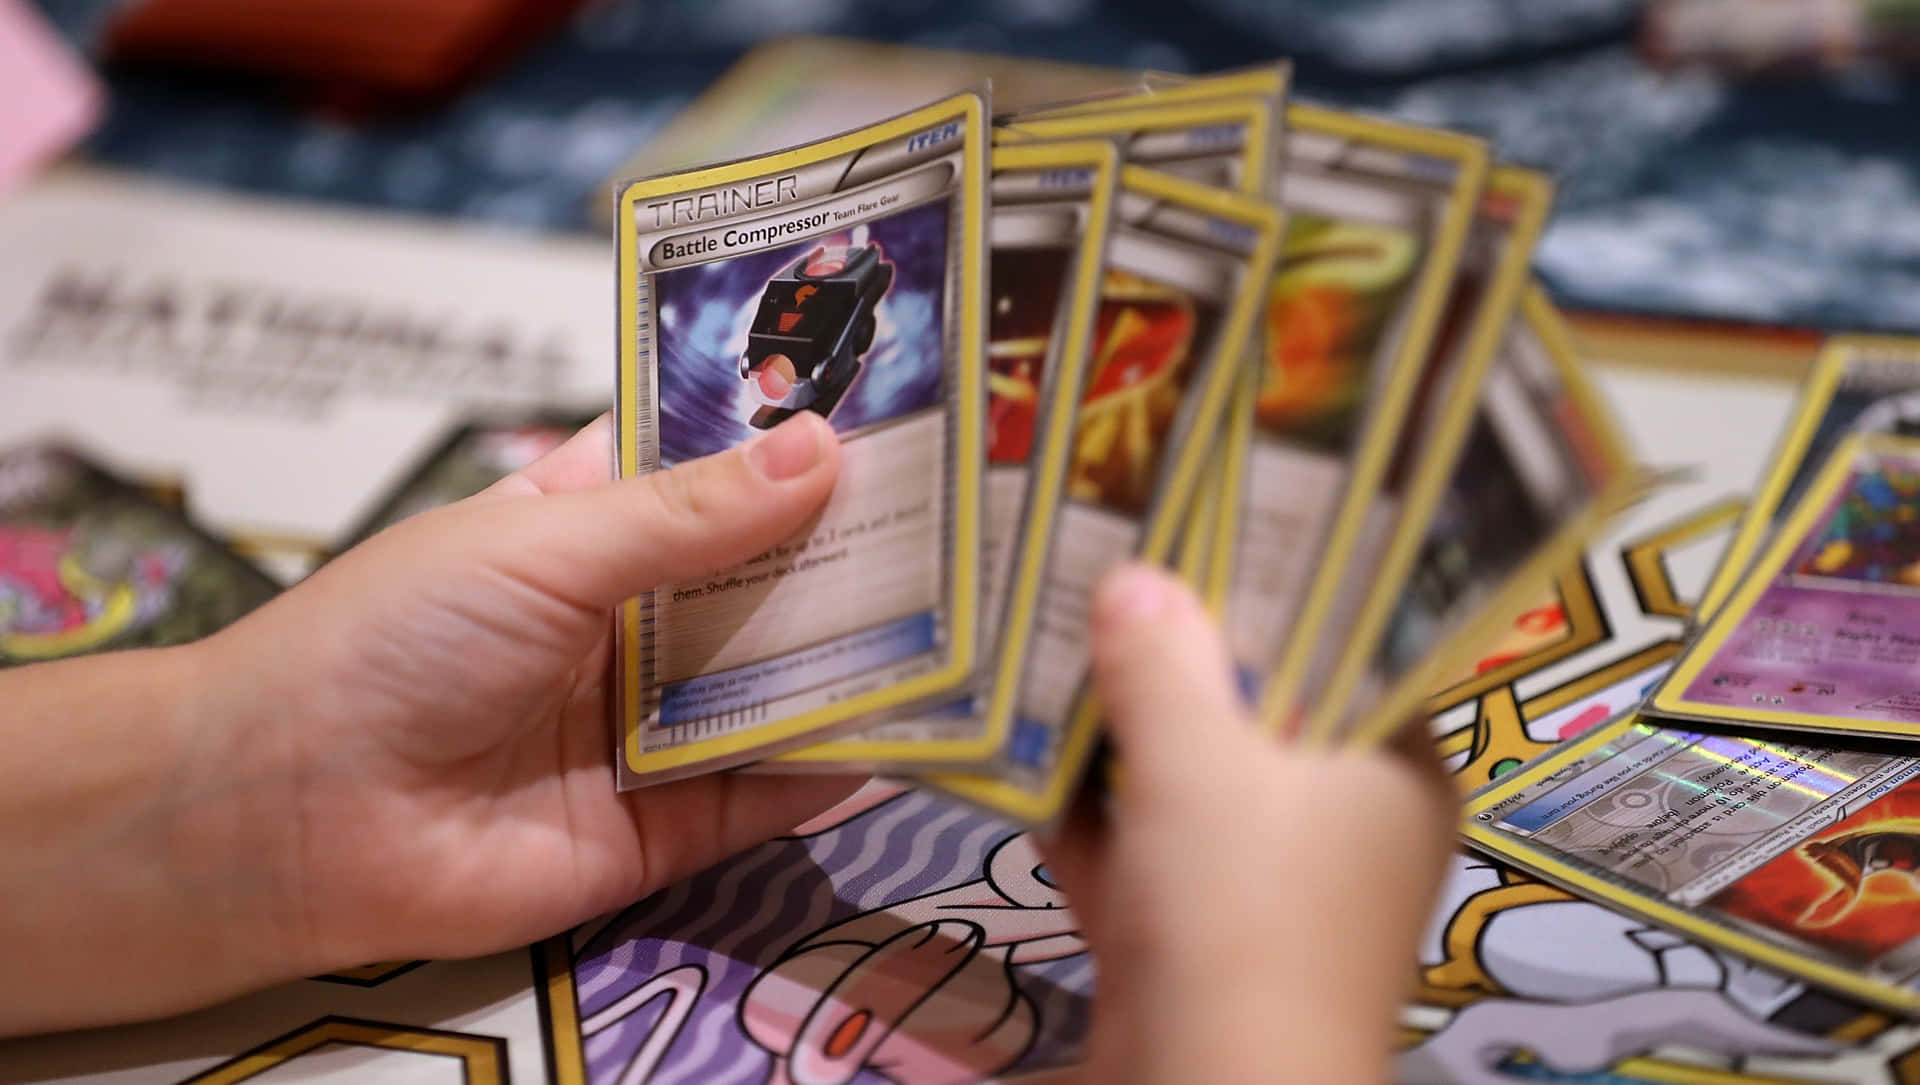 Put your skills to the test as you battle with your favorite Pokemon trading cards!